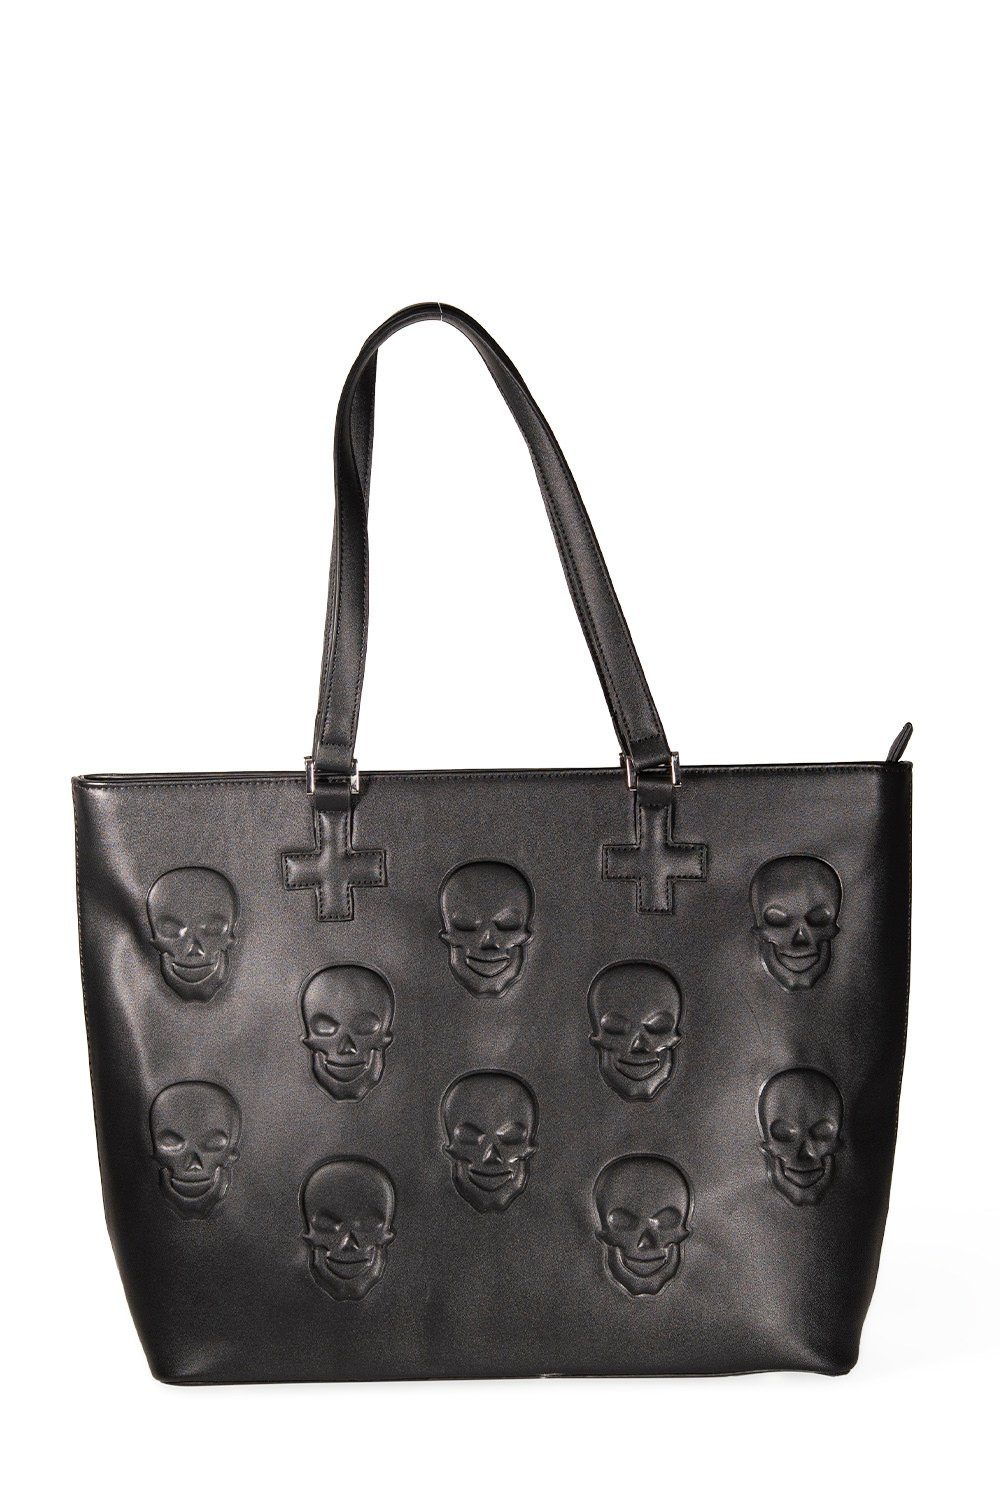 Banned Schultertasche Menth Tote Bag, Geprägtes Skull Muster Shopper